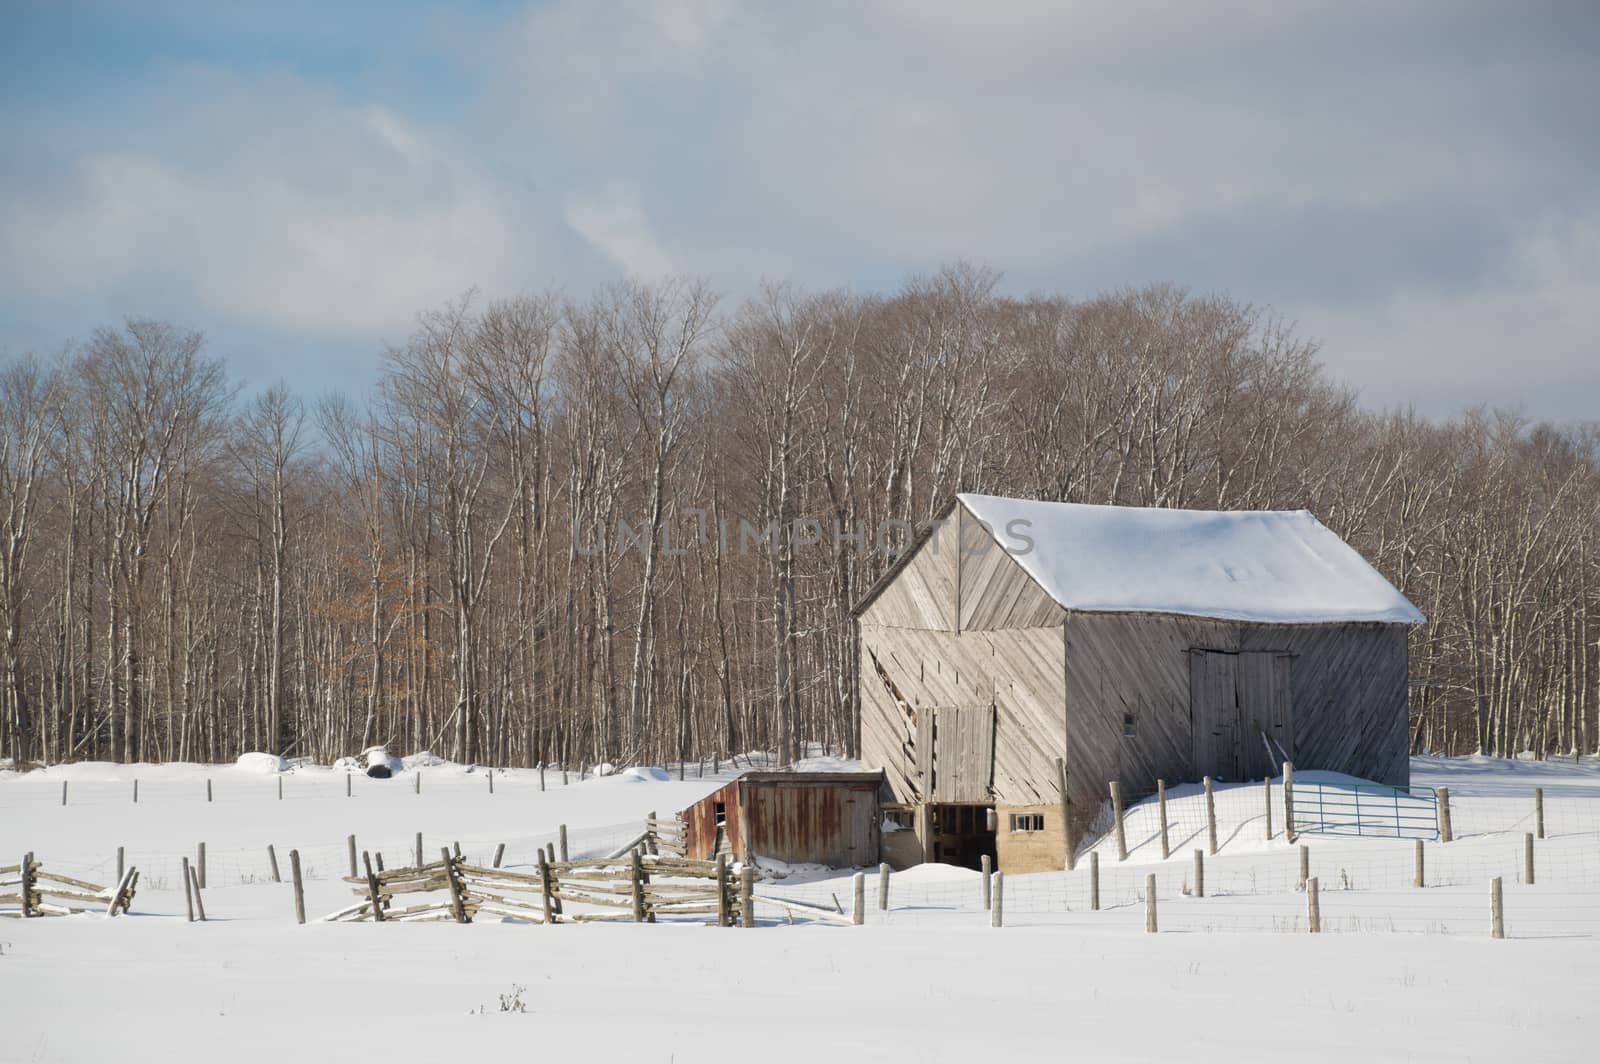 Snowy old  barn on a sunny day. Barnboards run diagonally and are grey, old and weathered. Shows some fence and  boards and barnyard and snow.